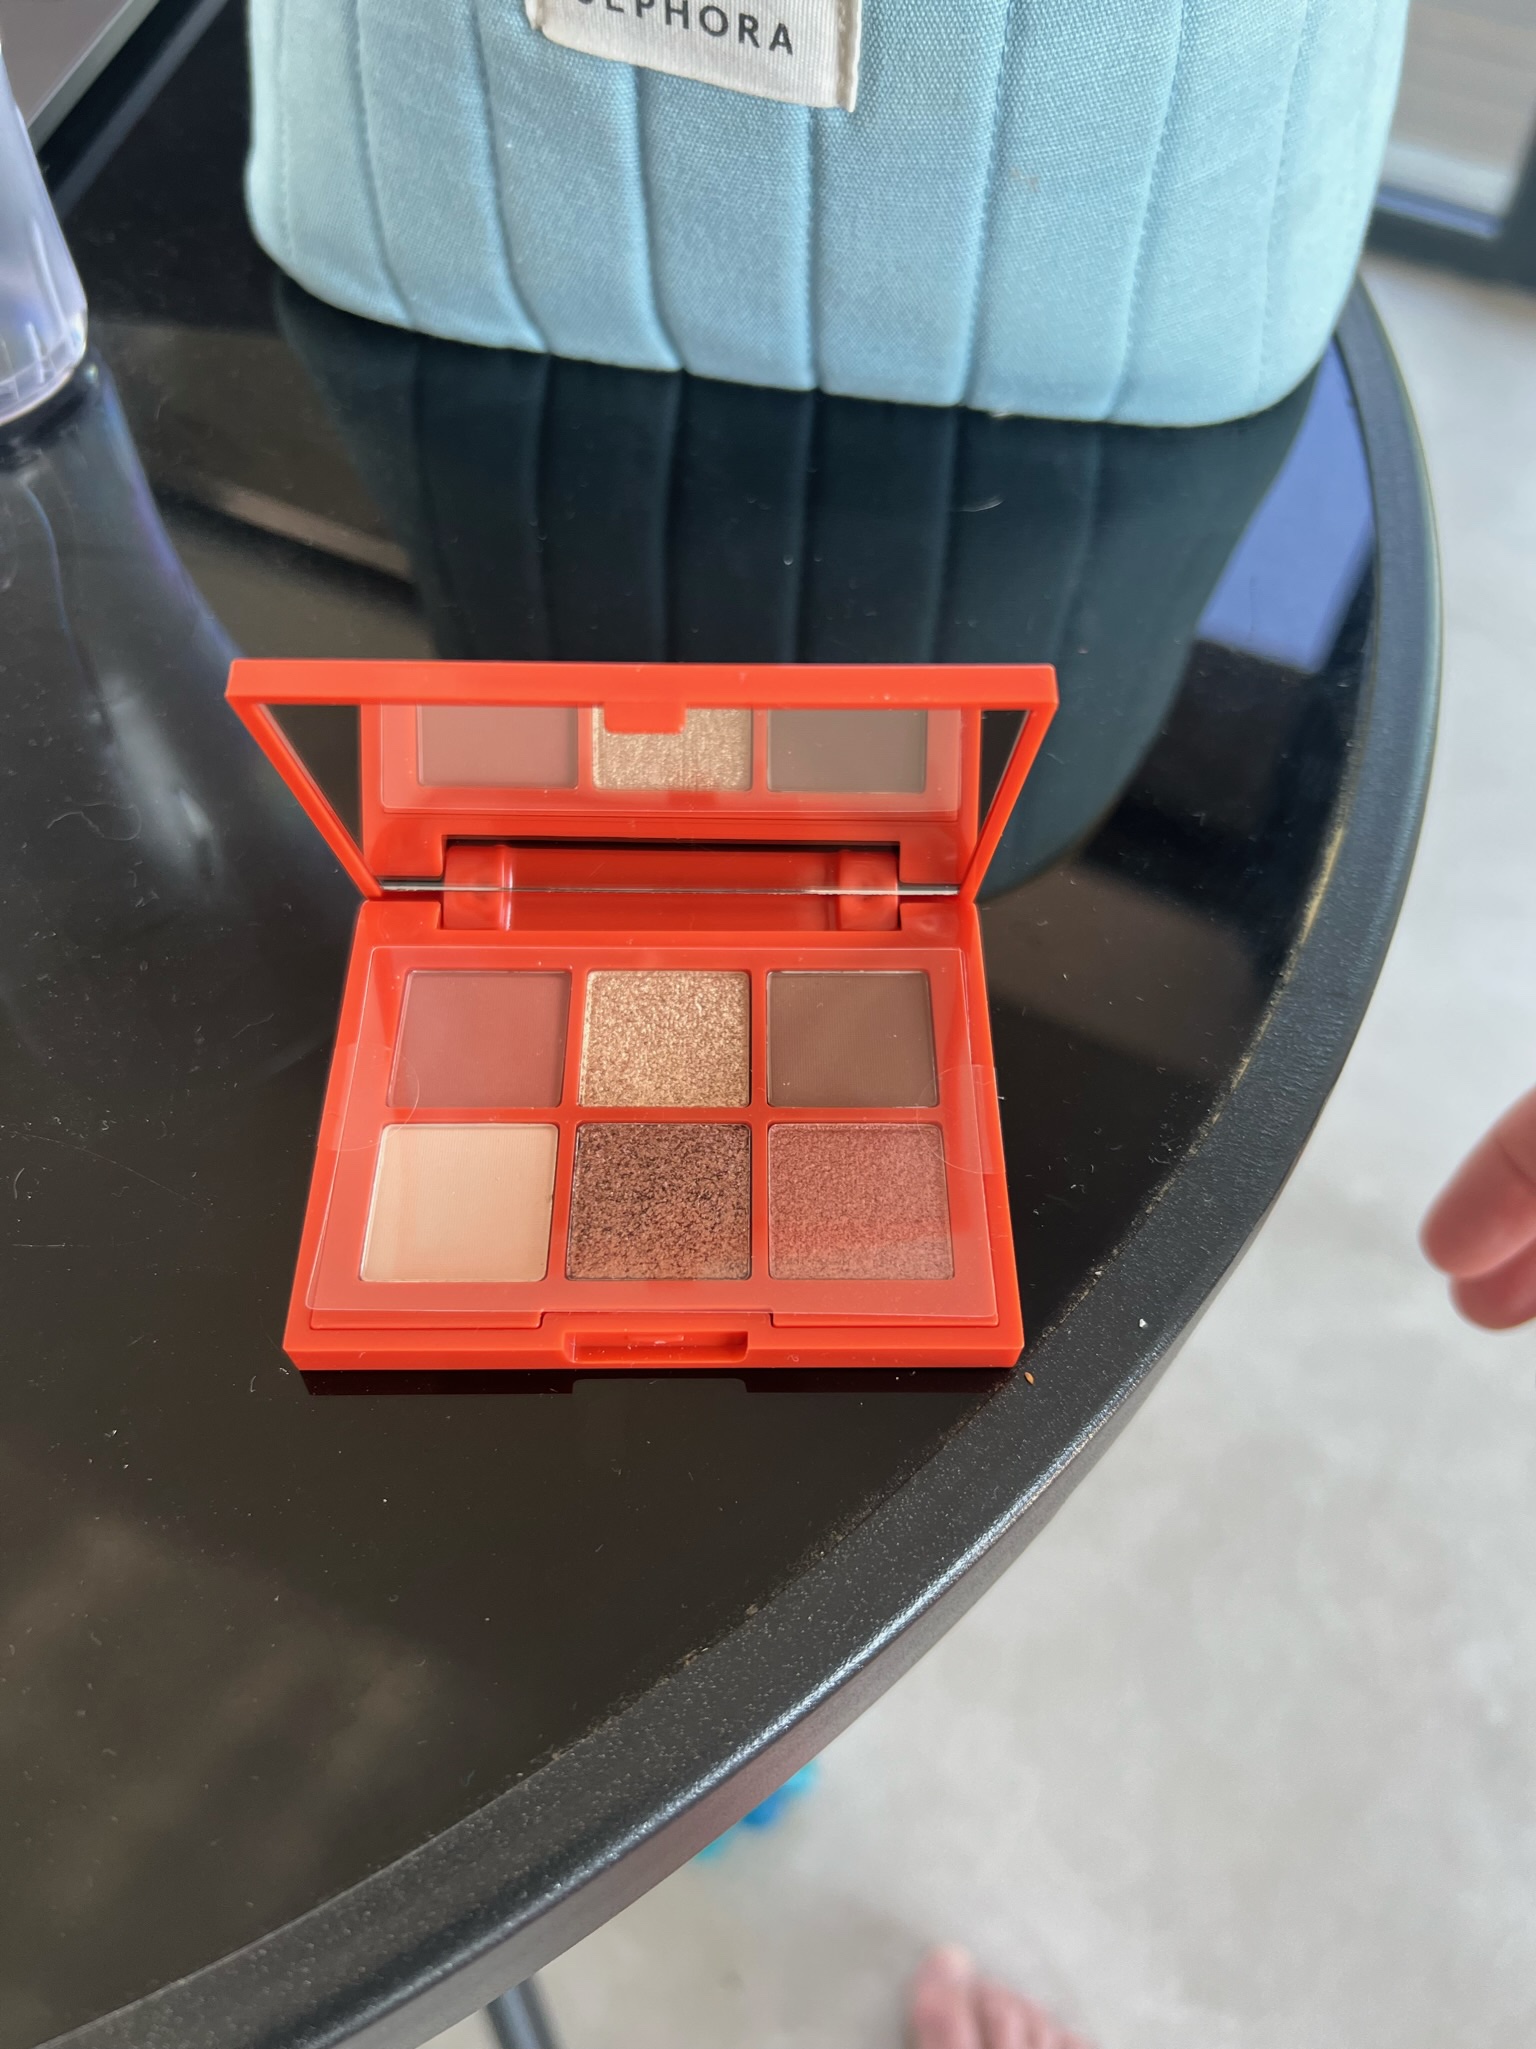 Review: Essence “Bronzed This Way” Eyeshadow Palette